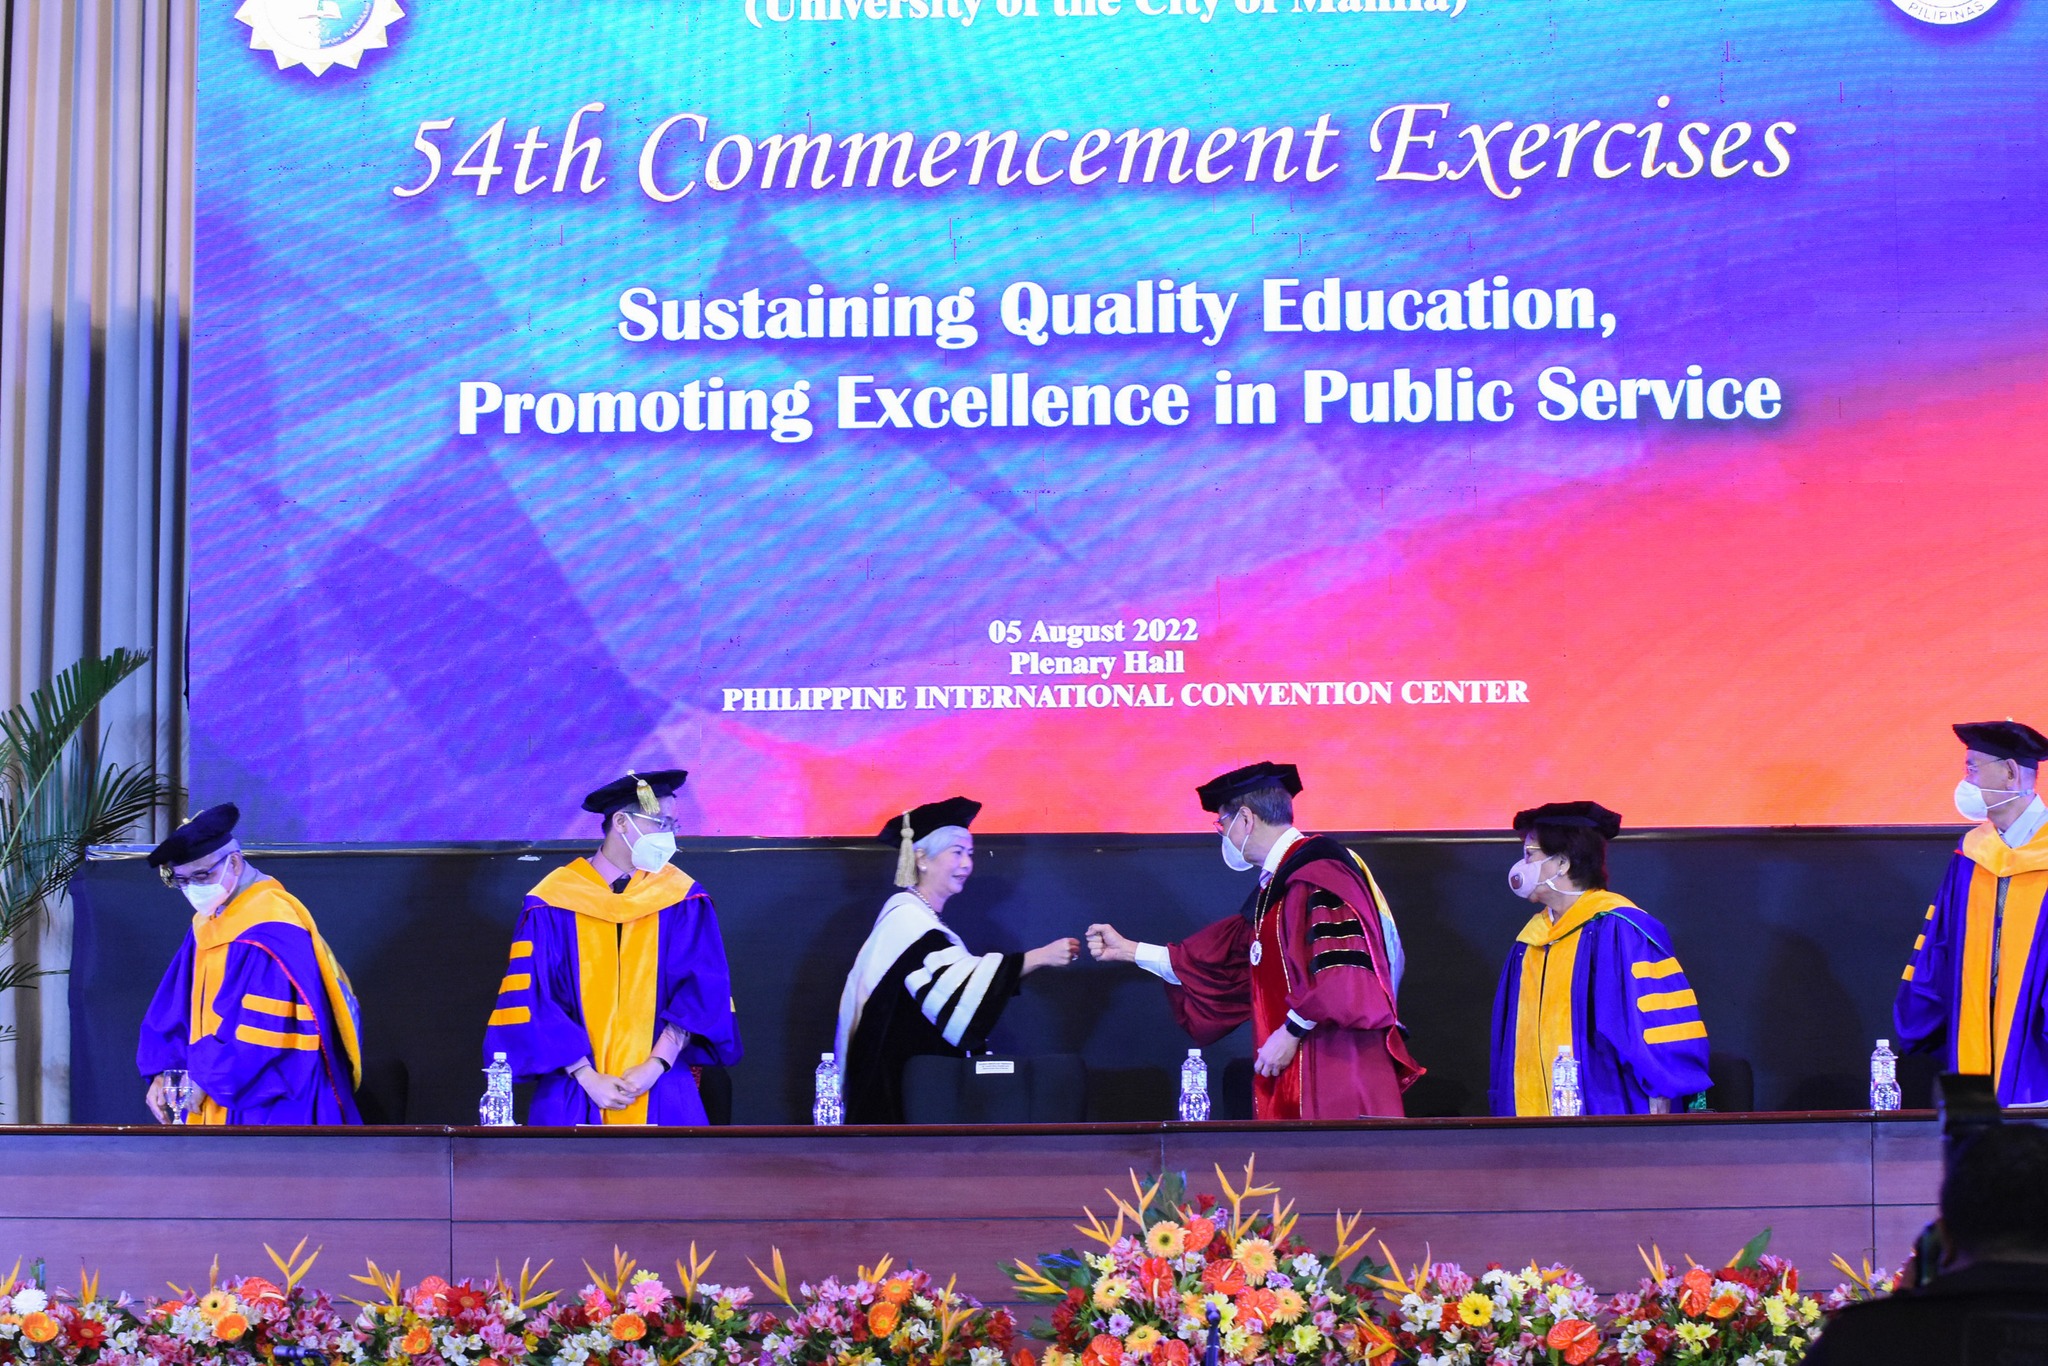 54th Commencement Exercises (PLM Class of 2022)